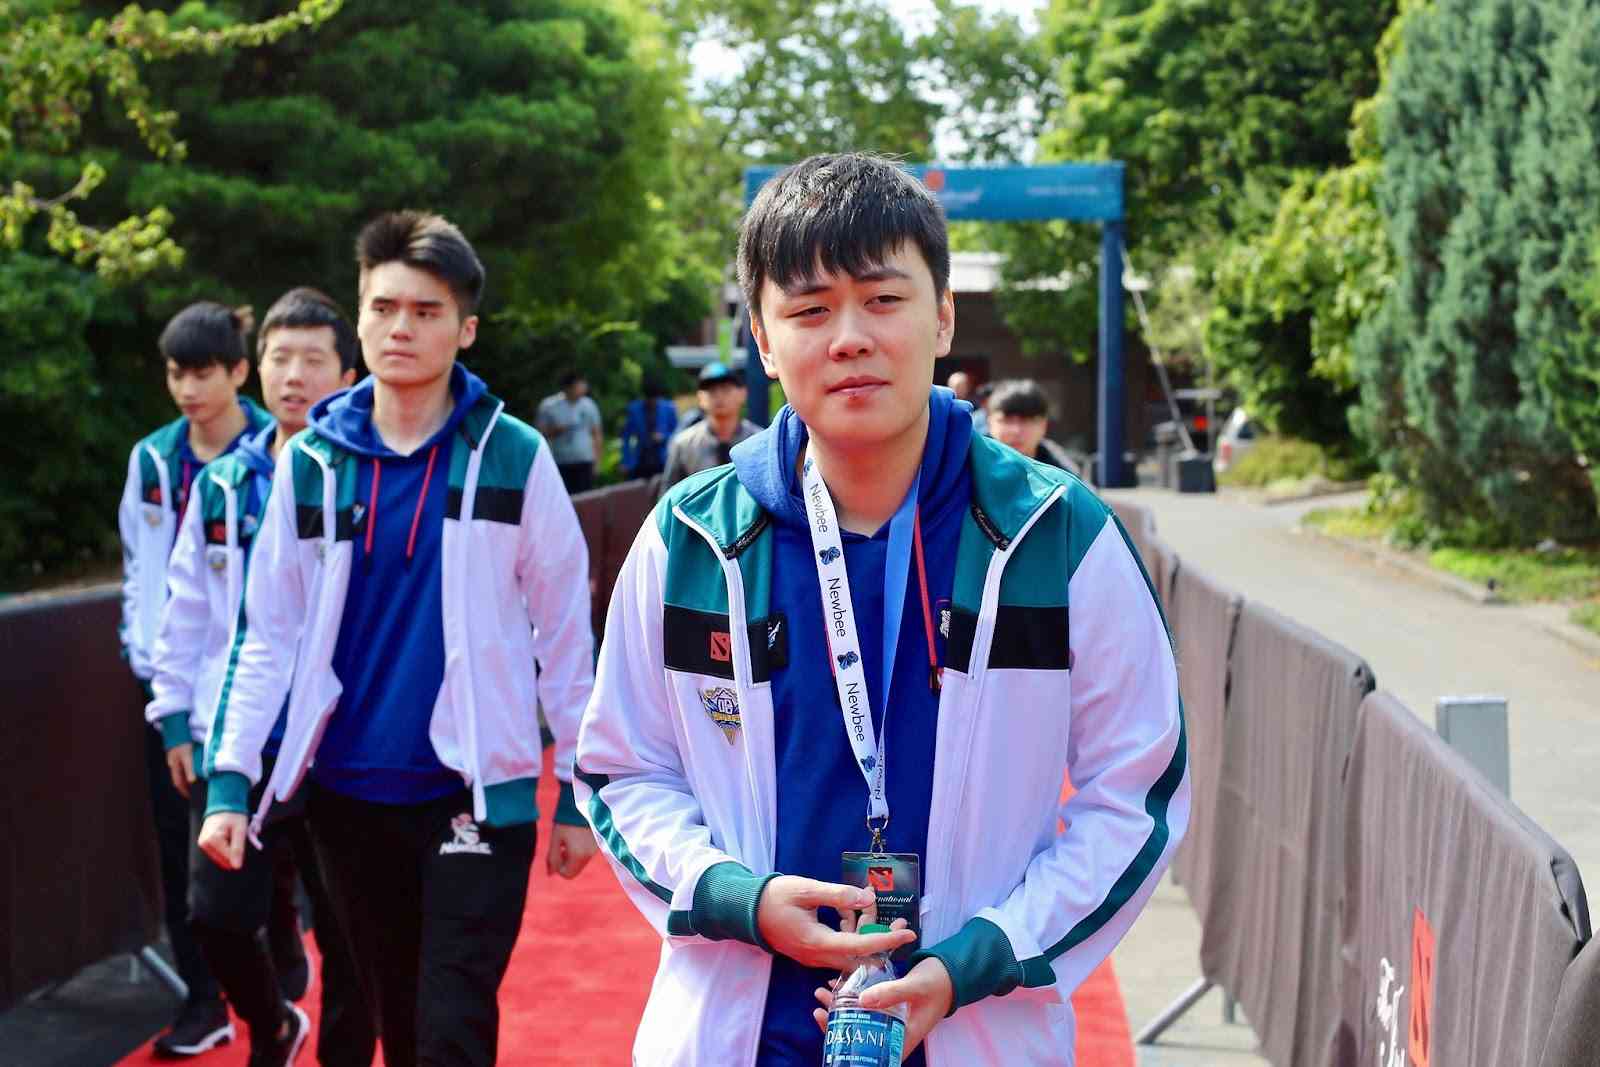 kpii arrives at TI 7 during his time with Newbee